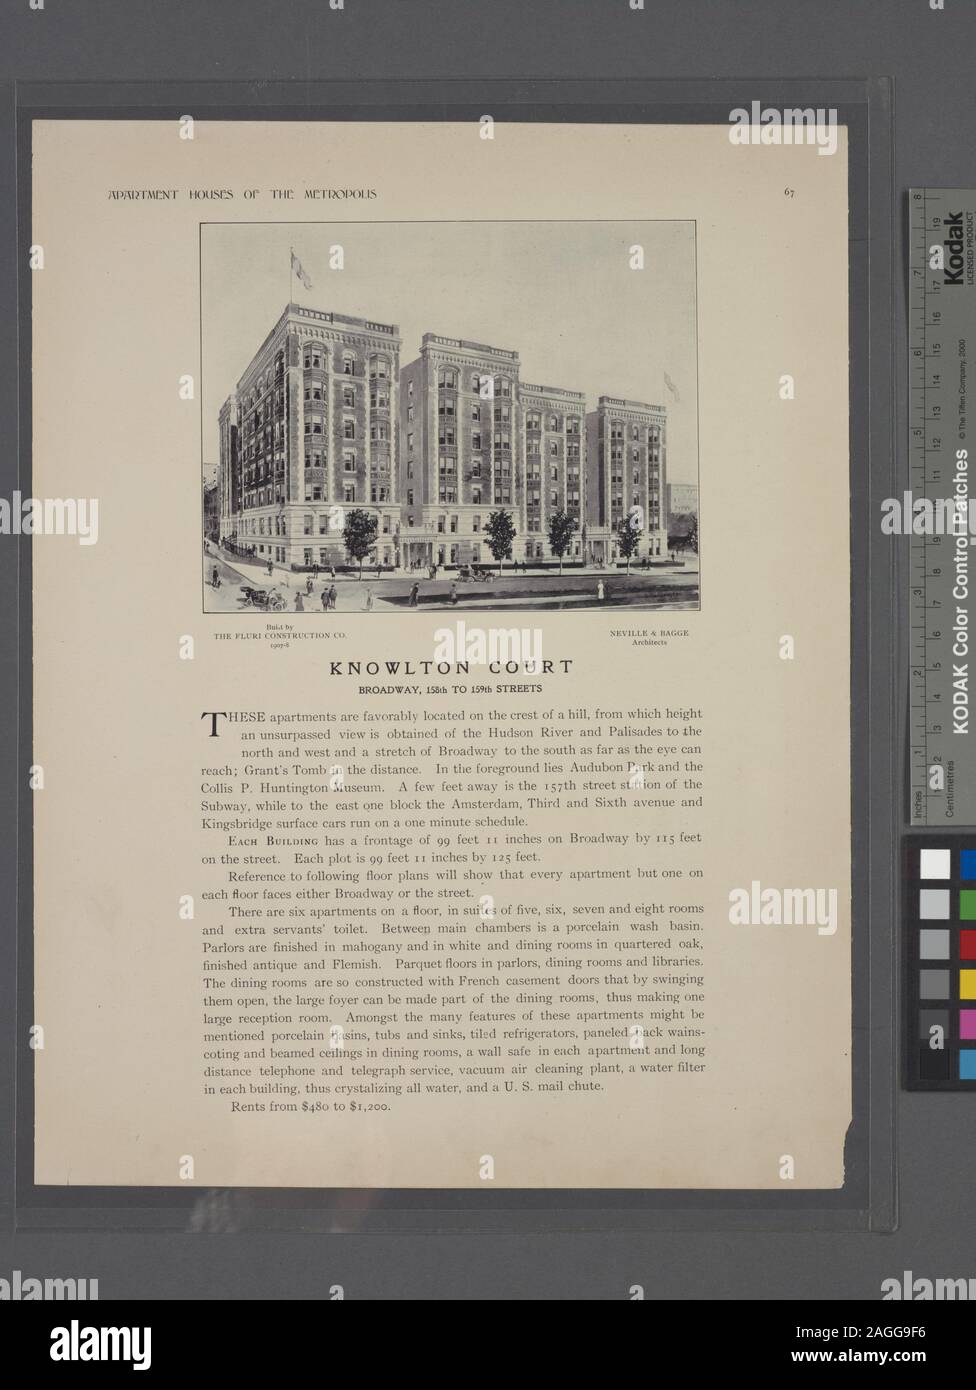 Includes index. Built by the Fluri Construction Co., 1907-08 / Architects - Neville & Bagge; Knowlton Court, Broadway, 158th to 159th Streets. Stock Photo